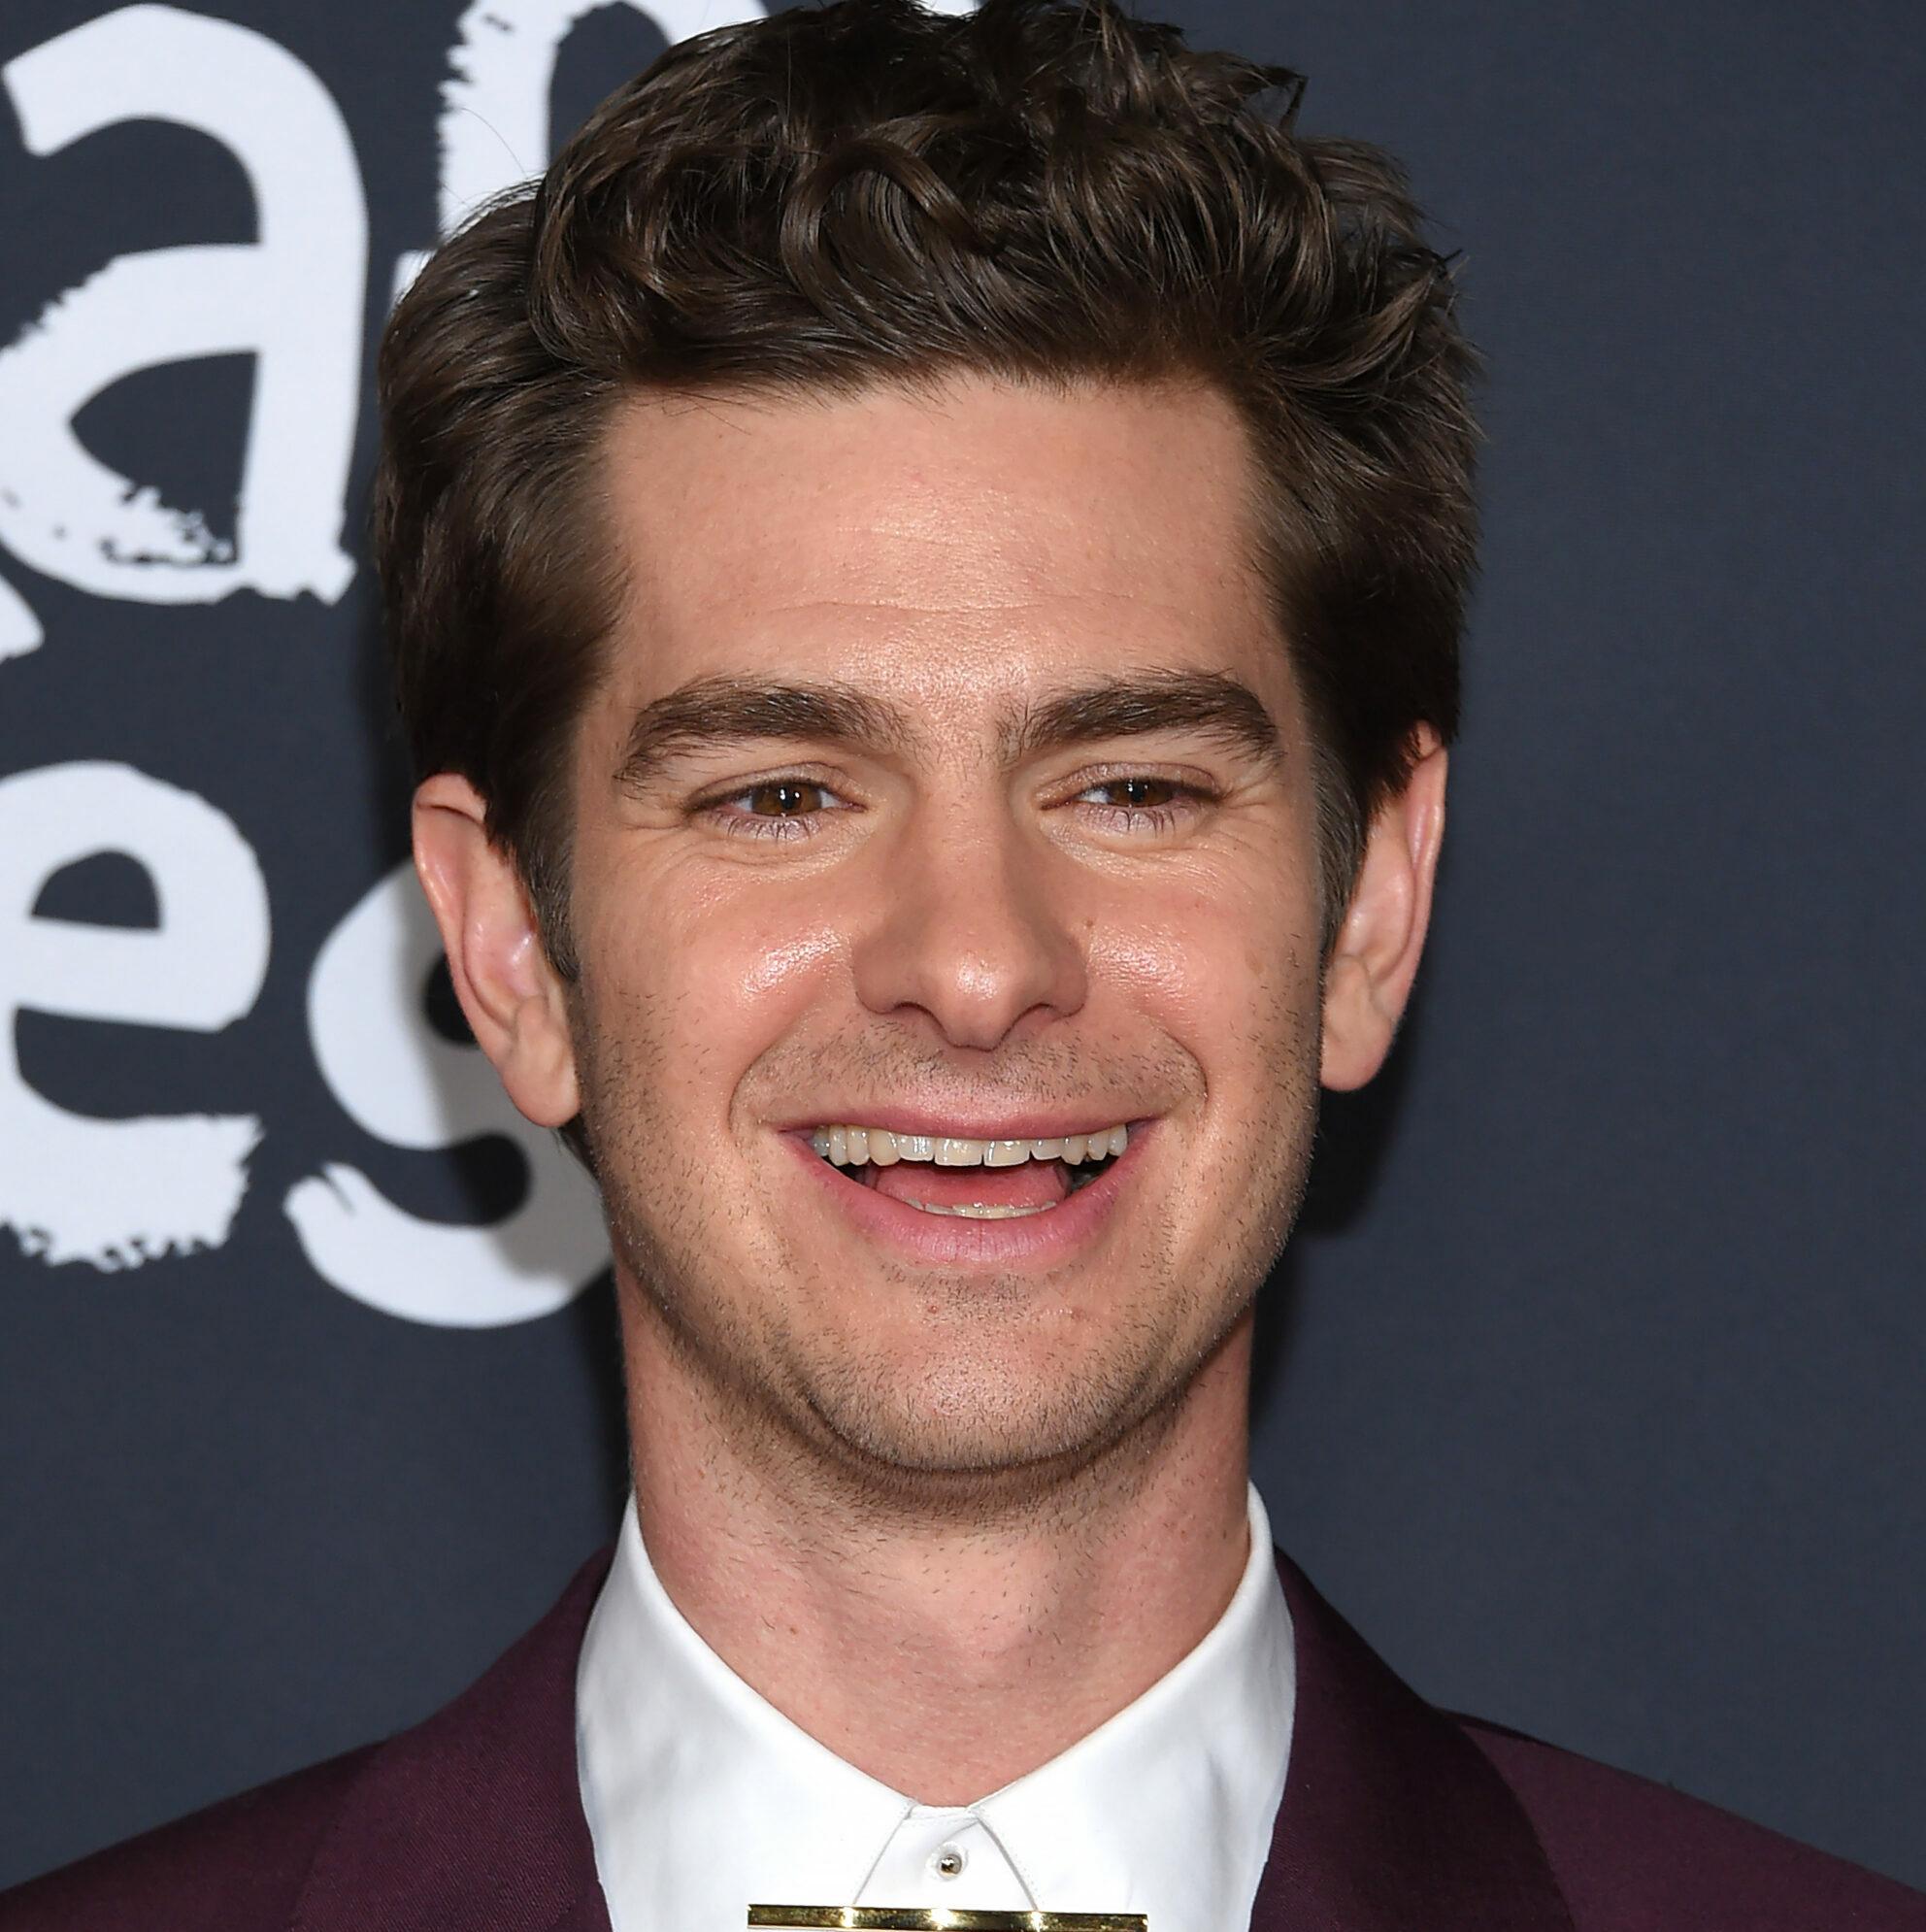 The world premiere of "tick, tick...BOOM!" during AFI Fest at the TCL Chinese Theatre IMAX on November 10, 2021 in Hollywood, CA. © OConnor/AFF-USA.com. 10 Nov 2021 Pictured: Andrew Garfield.